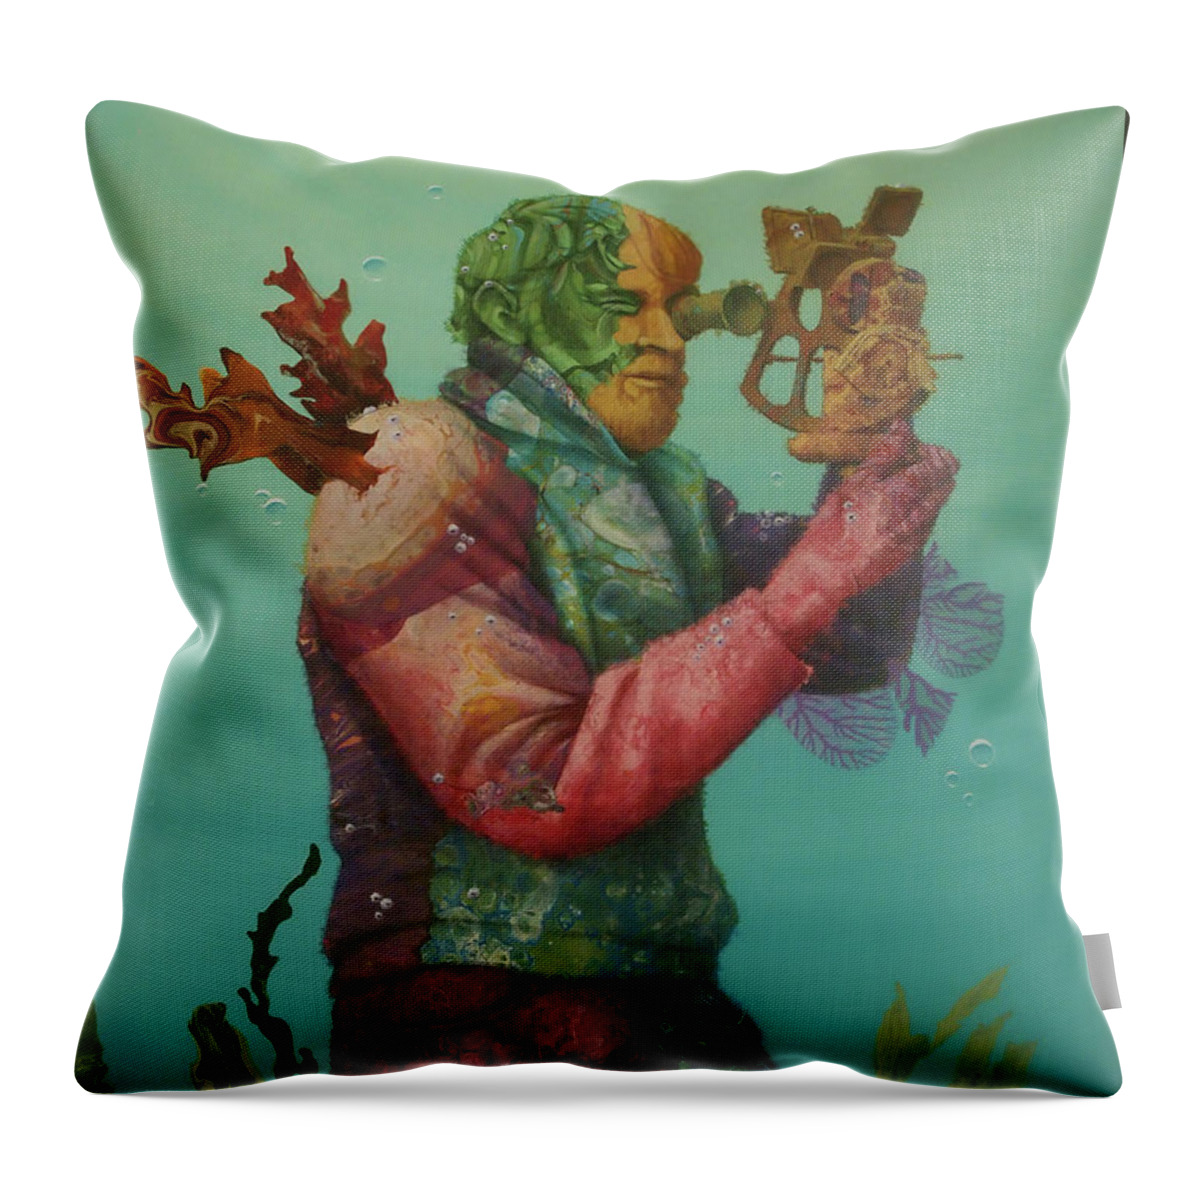 Ocean Throw Pillow featuring the painting Reef Sighting by Marguerite Chadwick-Juner